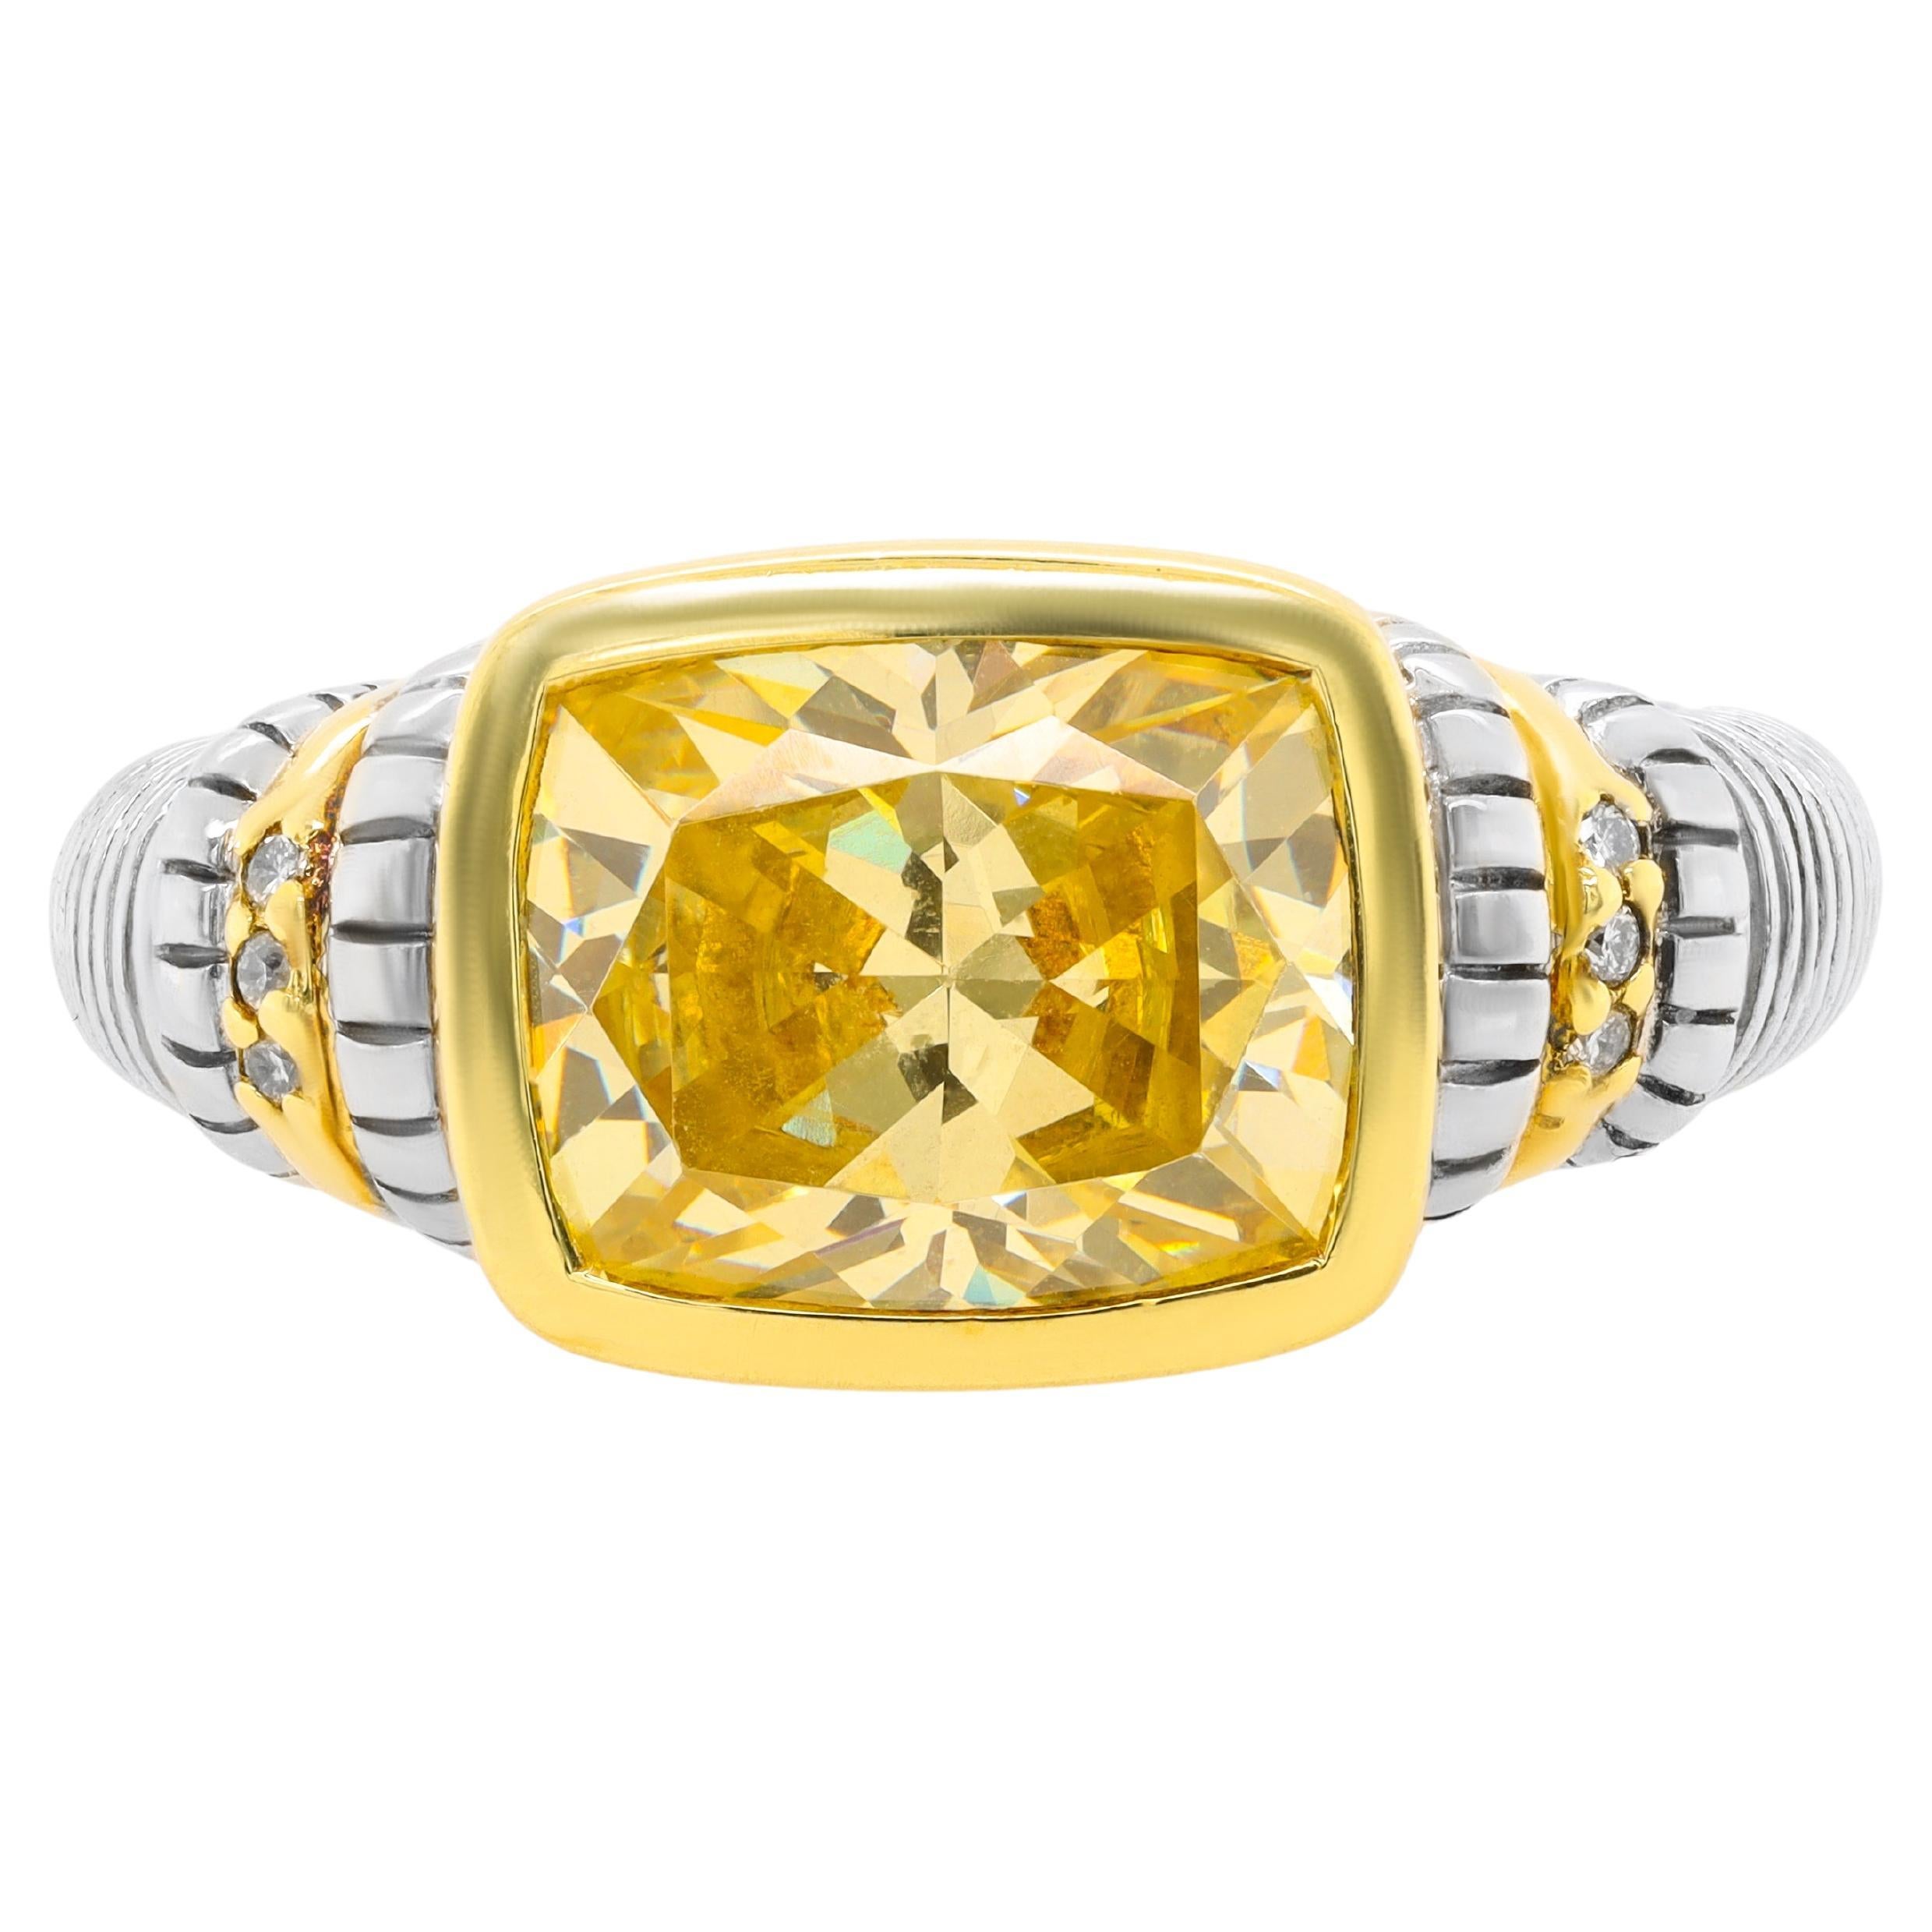 Diana M. Silver and 18 kt yellow gold Judith Ripka style citrine ring with a 4.2 For Sale